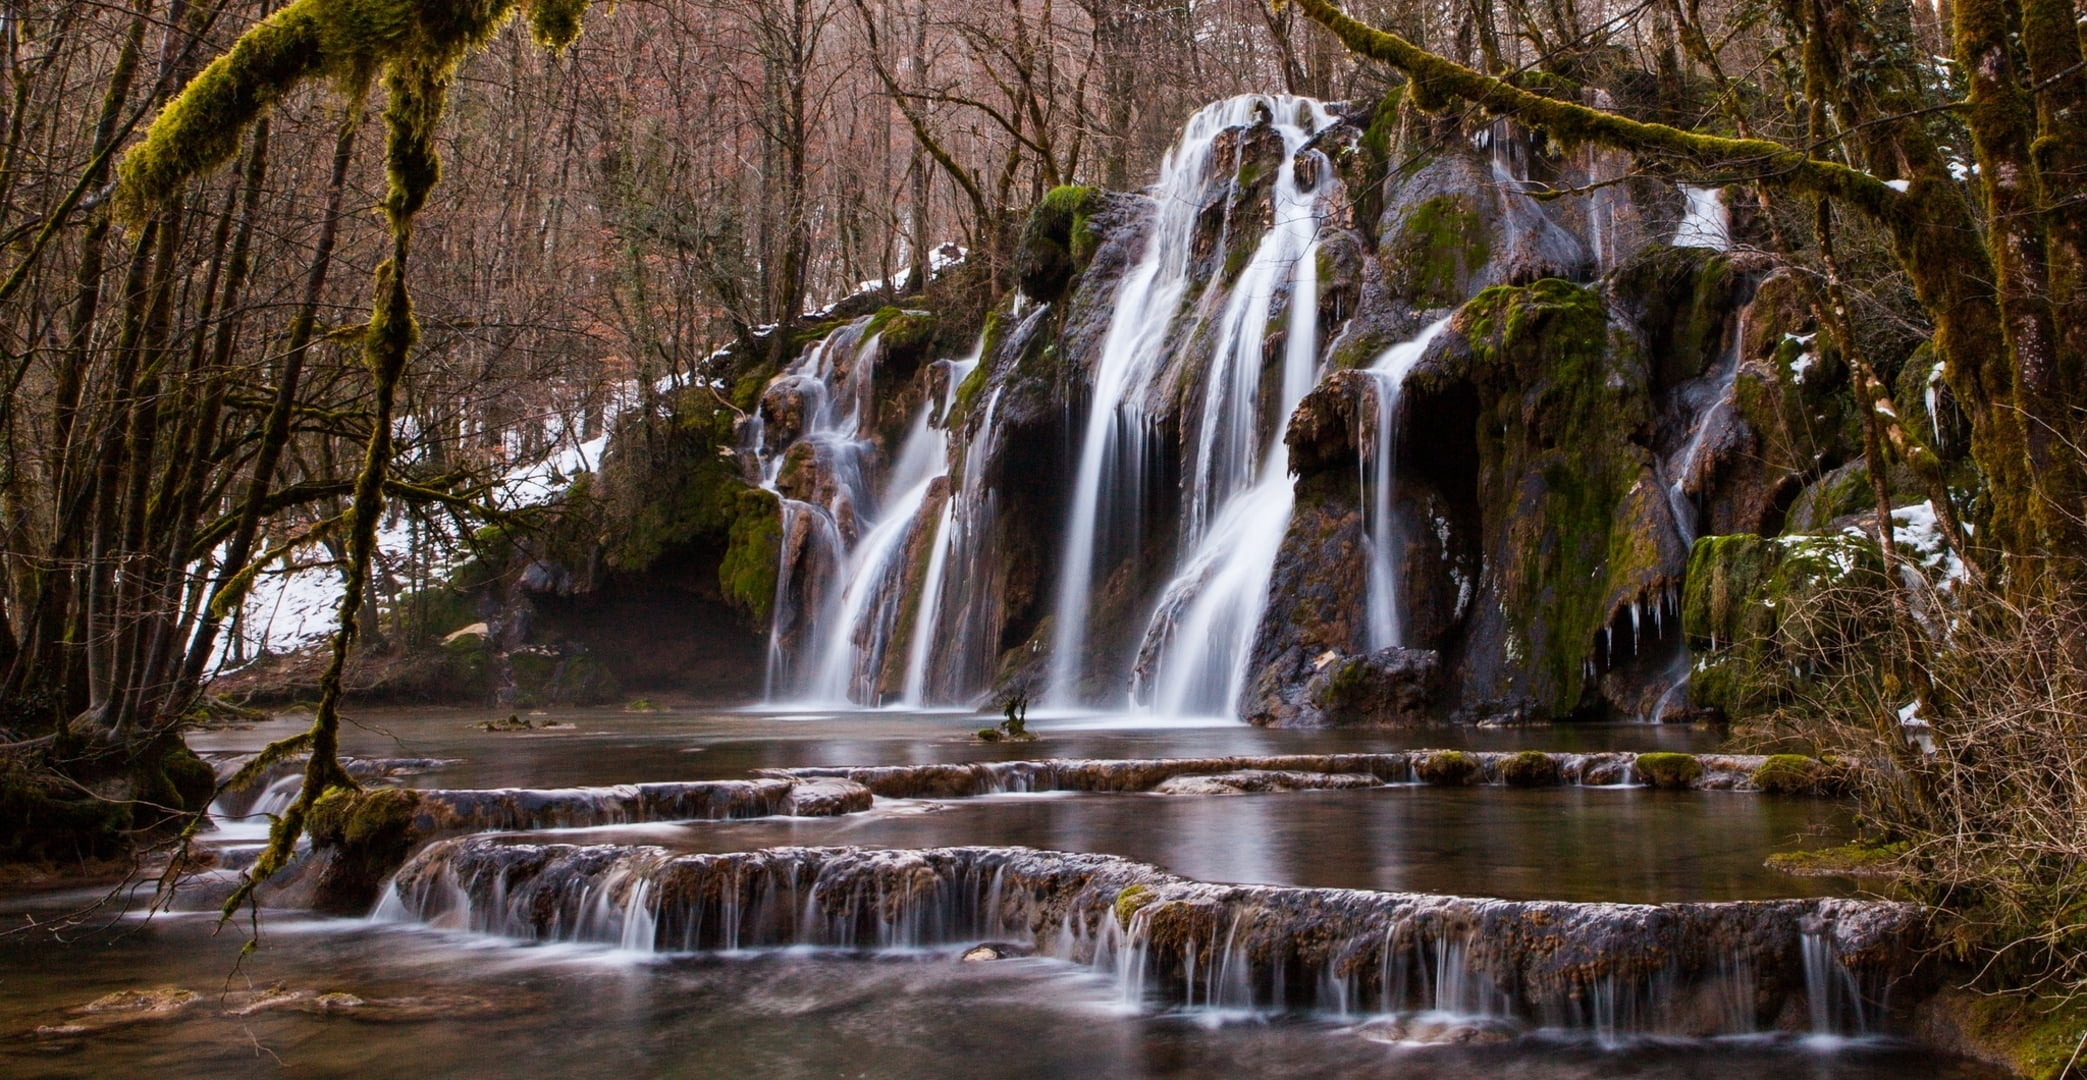 timelapse photo of moss-covered rocks with waterfall